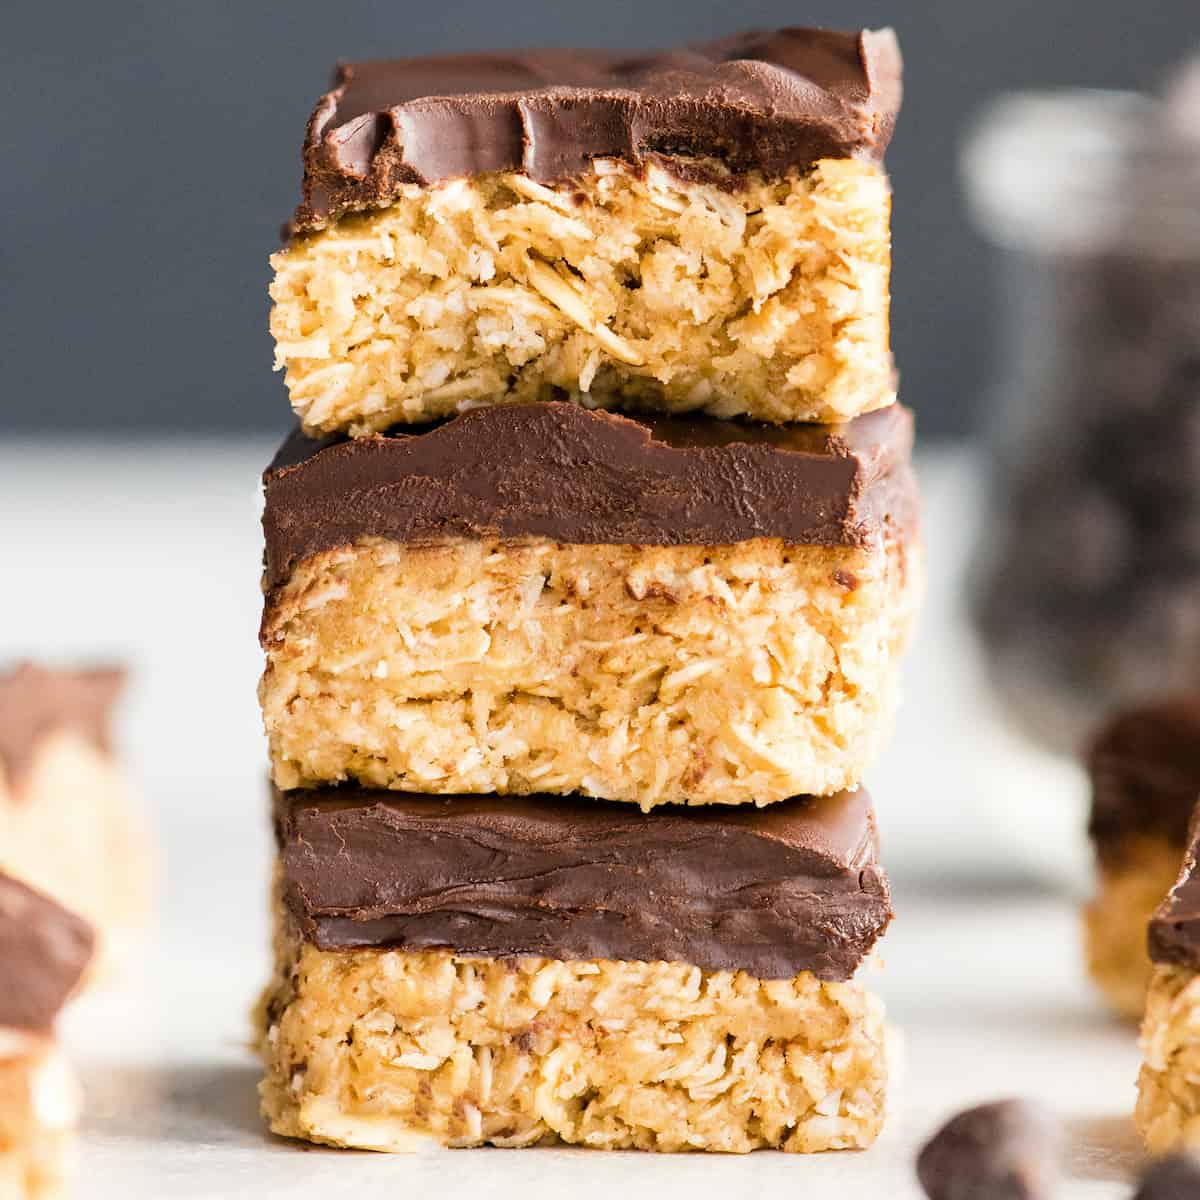 front view of a stack of three No-Bake Oatmeal Bars with Peanut Butter & Coconut, the top one has a bite taken out of it